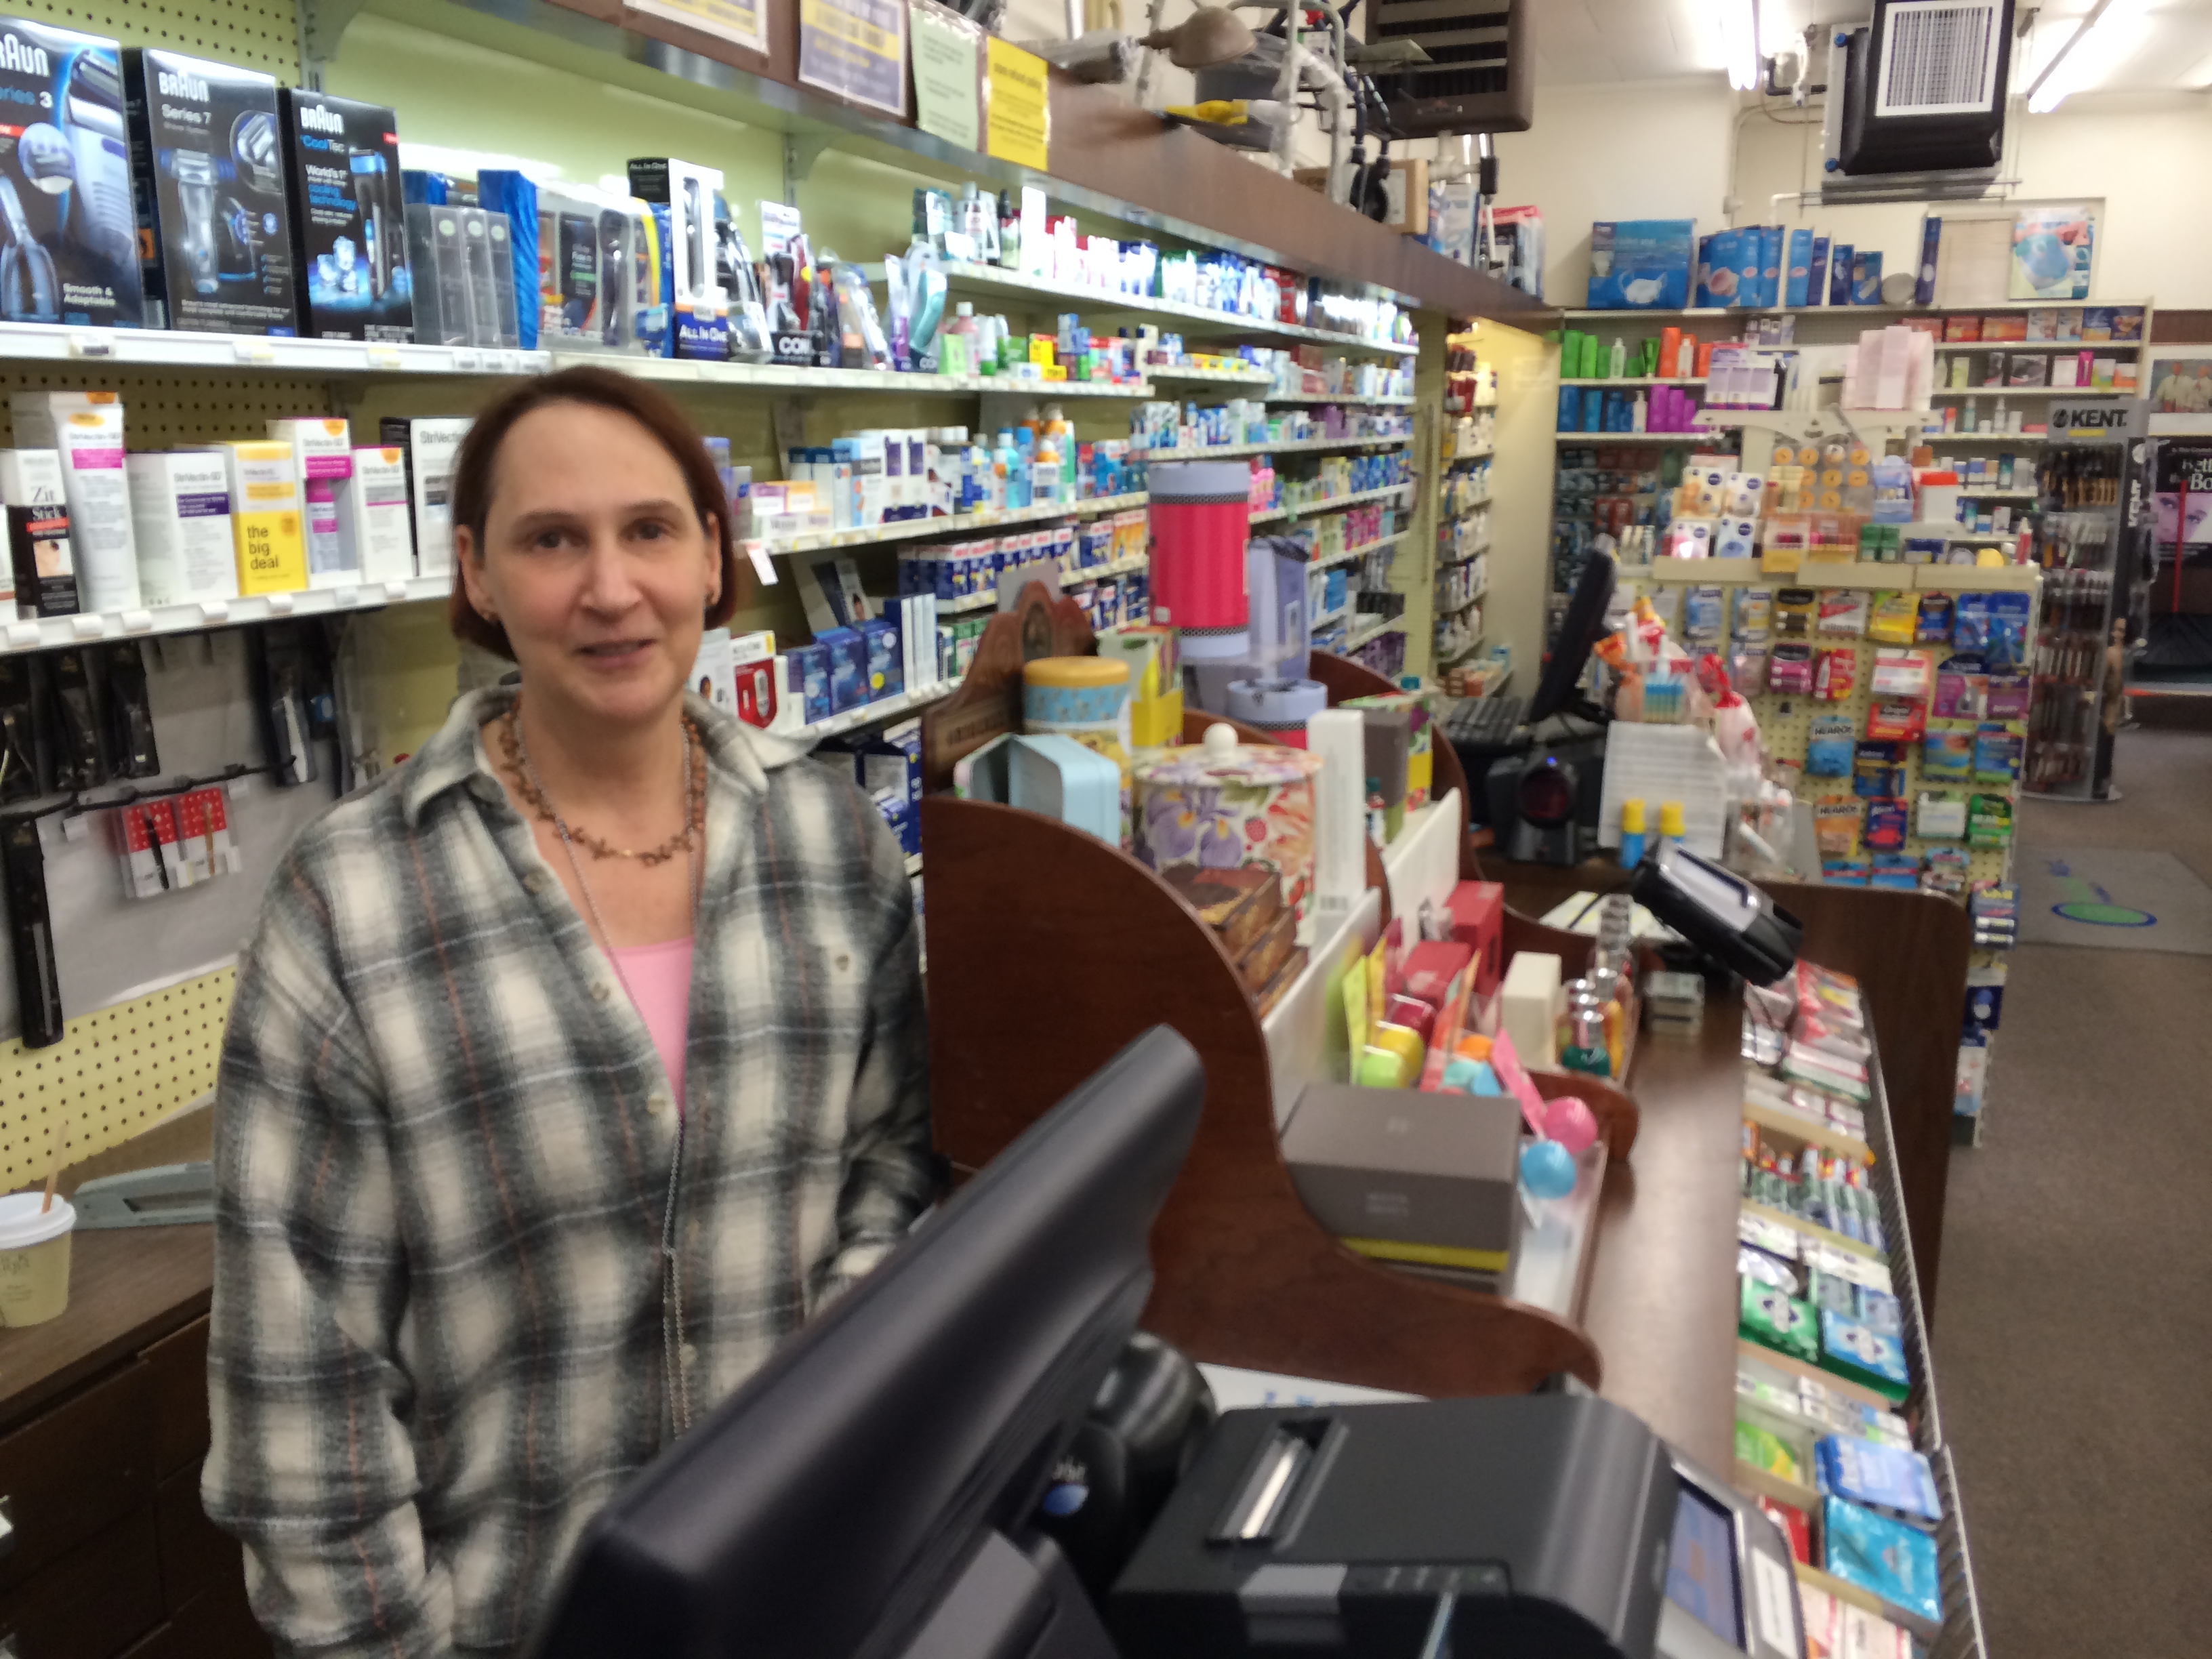 Dorrie Plotnick says Varnum's Pharmacy will occupy a completely renovated space after its move down to the corner of Cherry Street and East Avenue. Credit: Michael Dinan